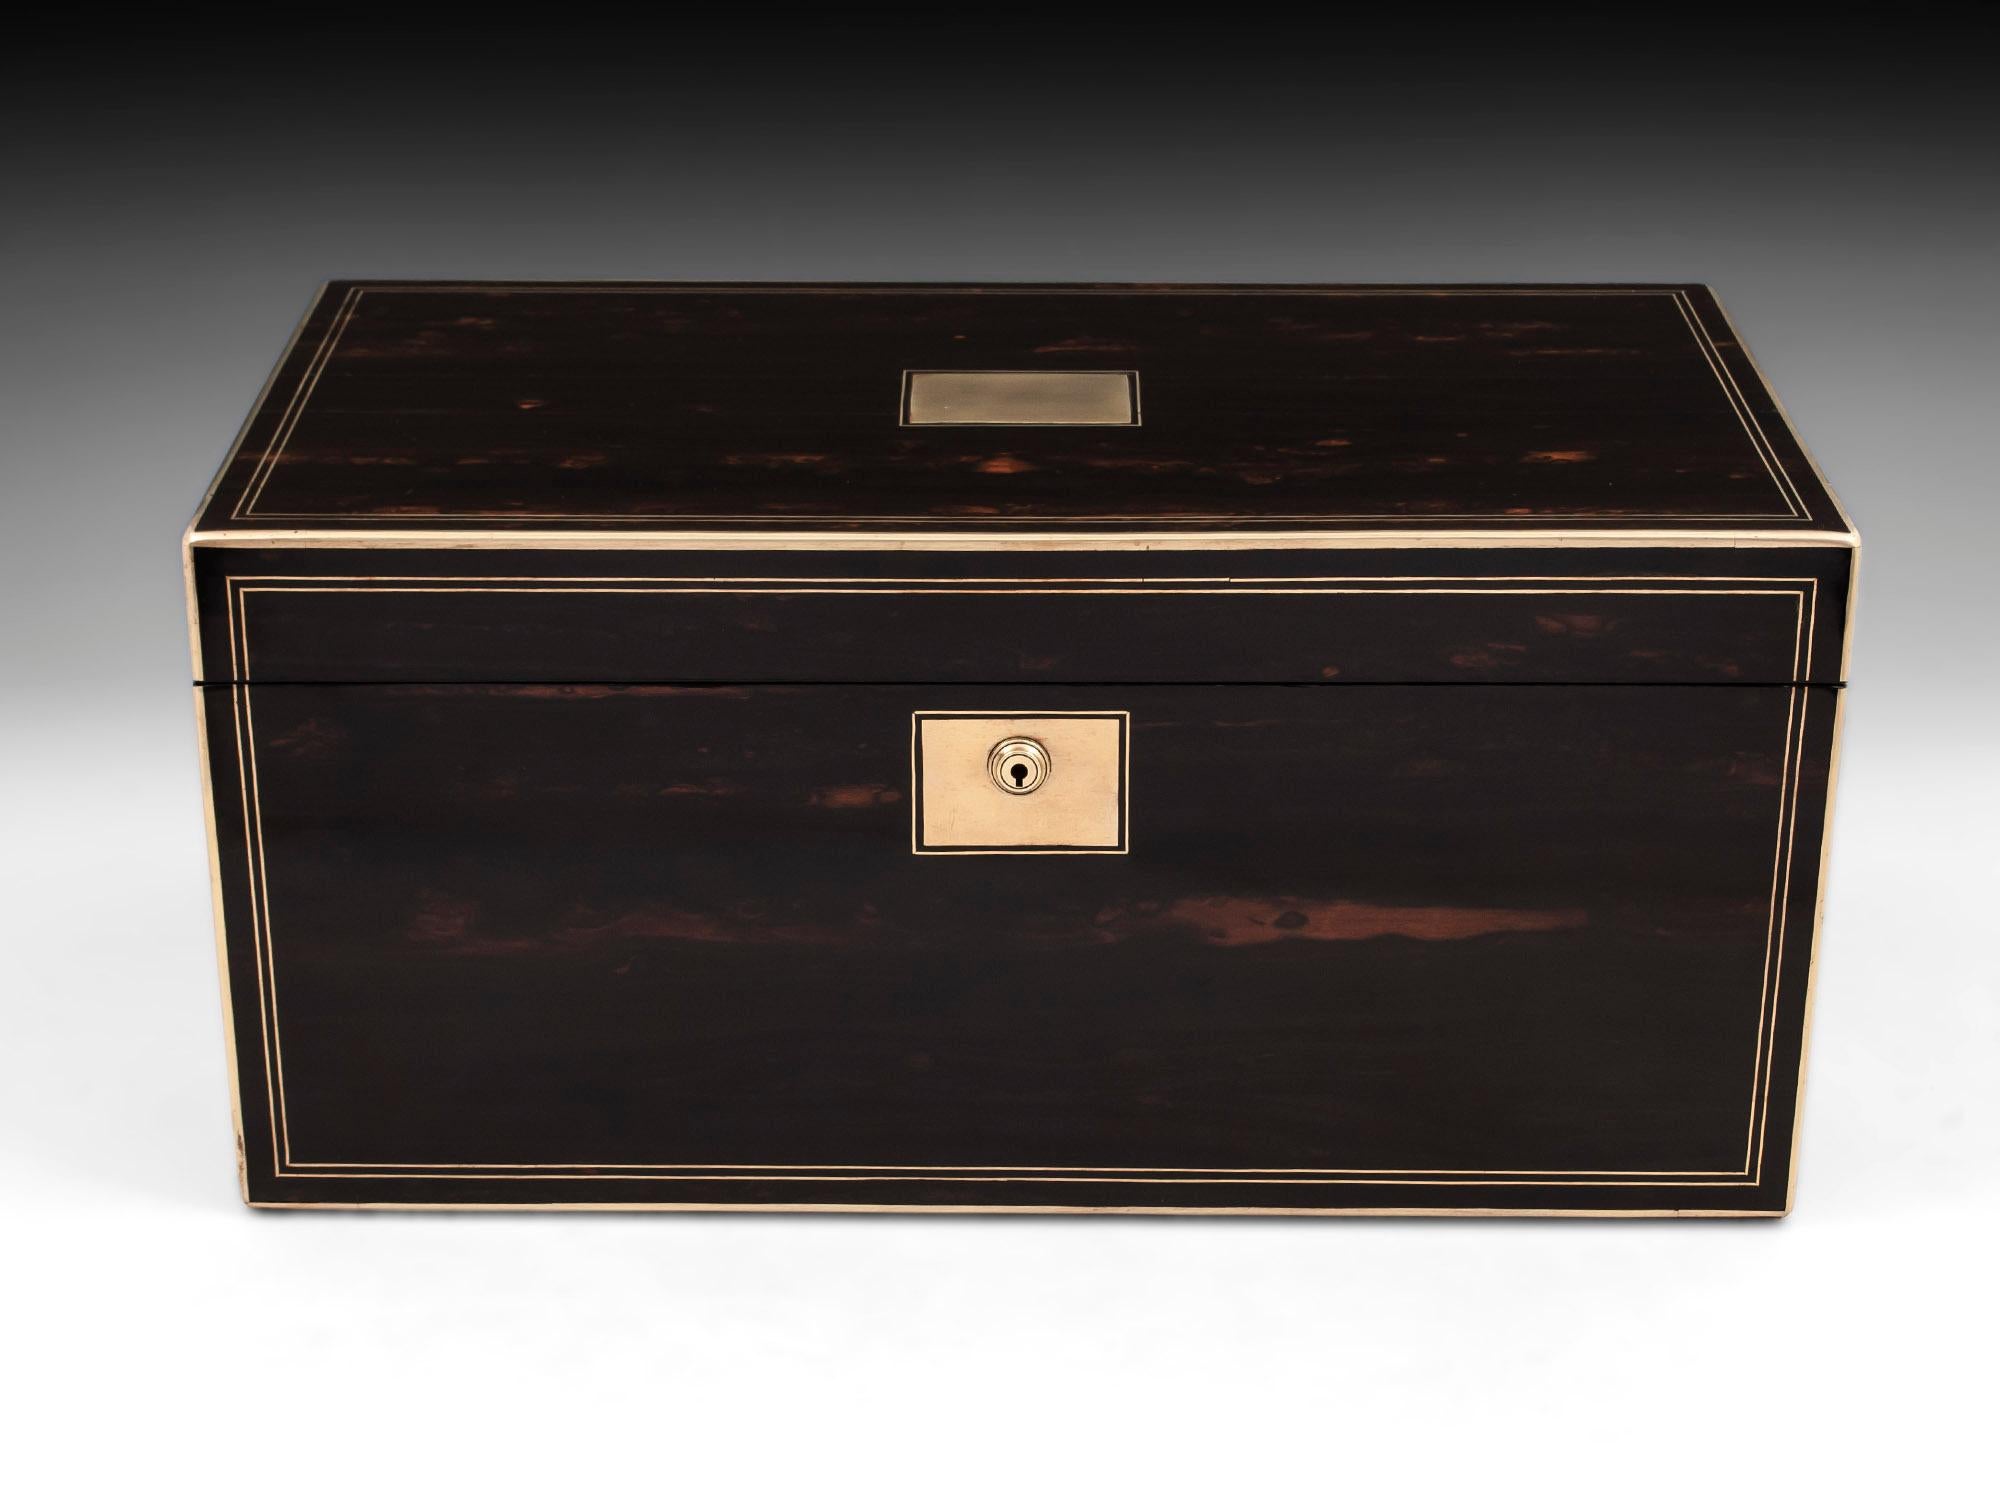 Antique writing box veneered in Coromandel with brass edging and double stringing, with a large vacant brass initial plate on the top and matching lock escutcheon, contains two secret compartments one with three drawers and another top secret